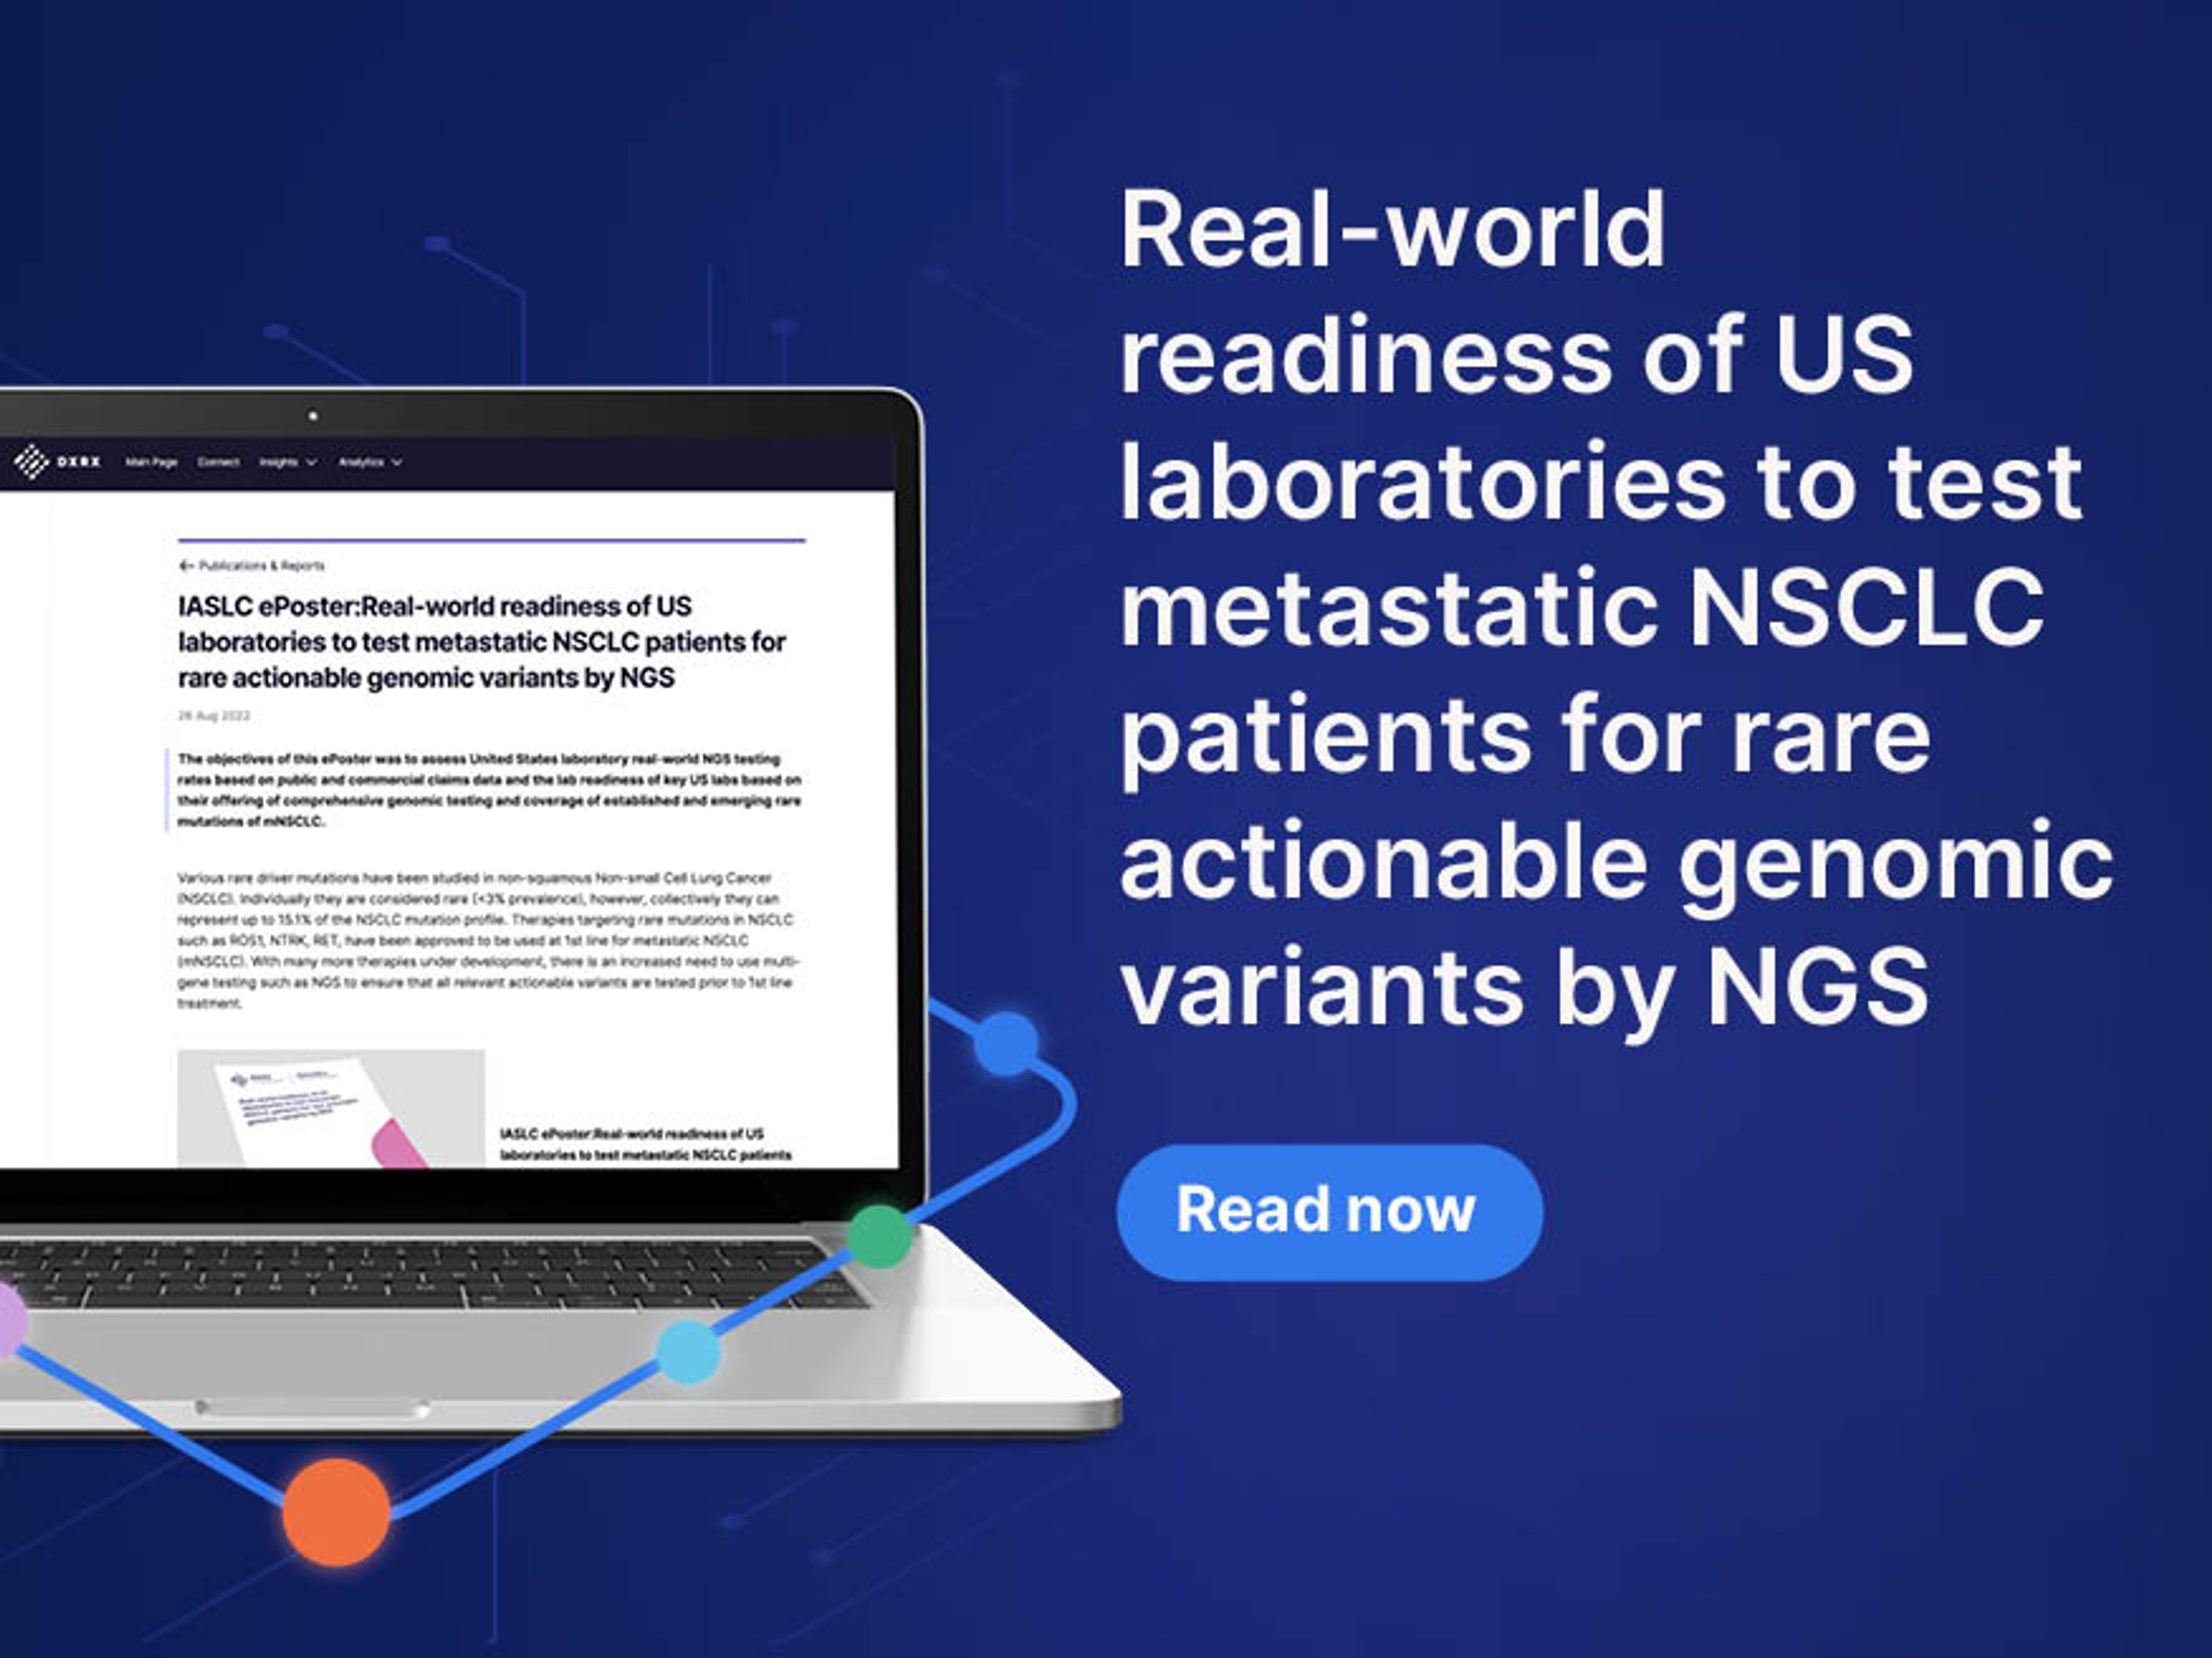 IASLC ePoster:Real-world readiness of US laboratories to test metastatic NSCLC patients for rare actionable genomic variants by NGS